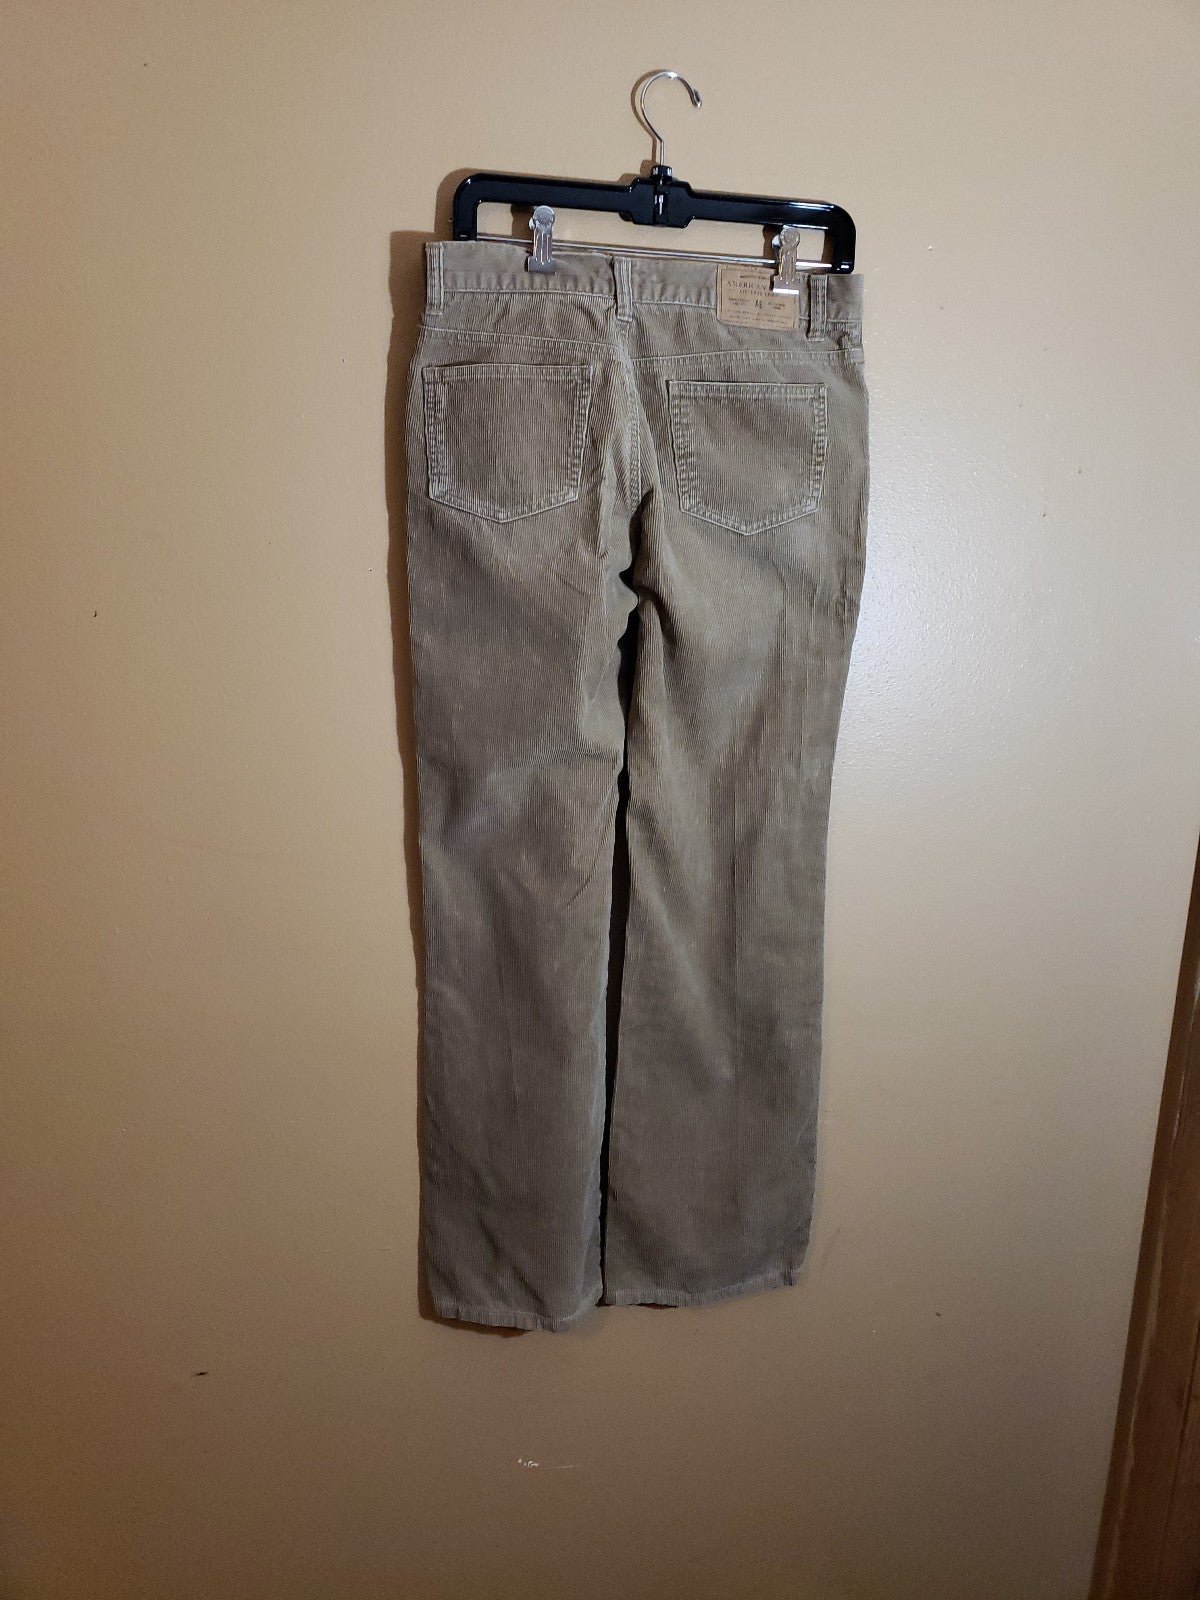 Discounted Women´s American Eagle Outfitters Corduroy Pants oCND0hq84 US Sale